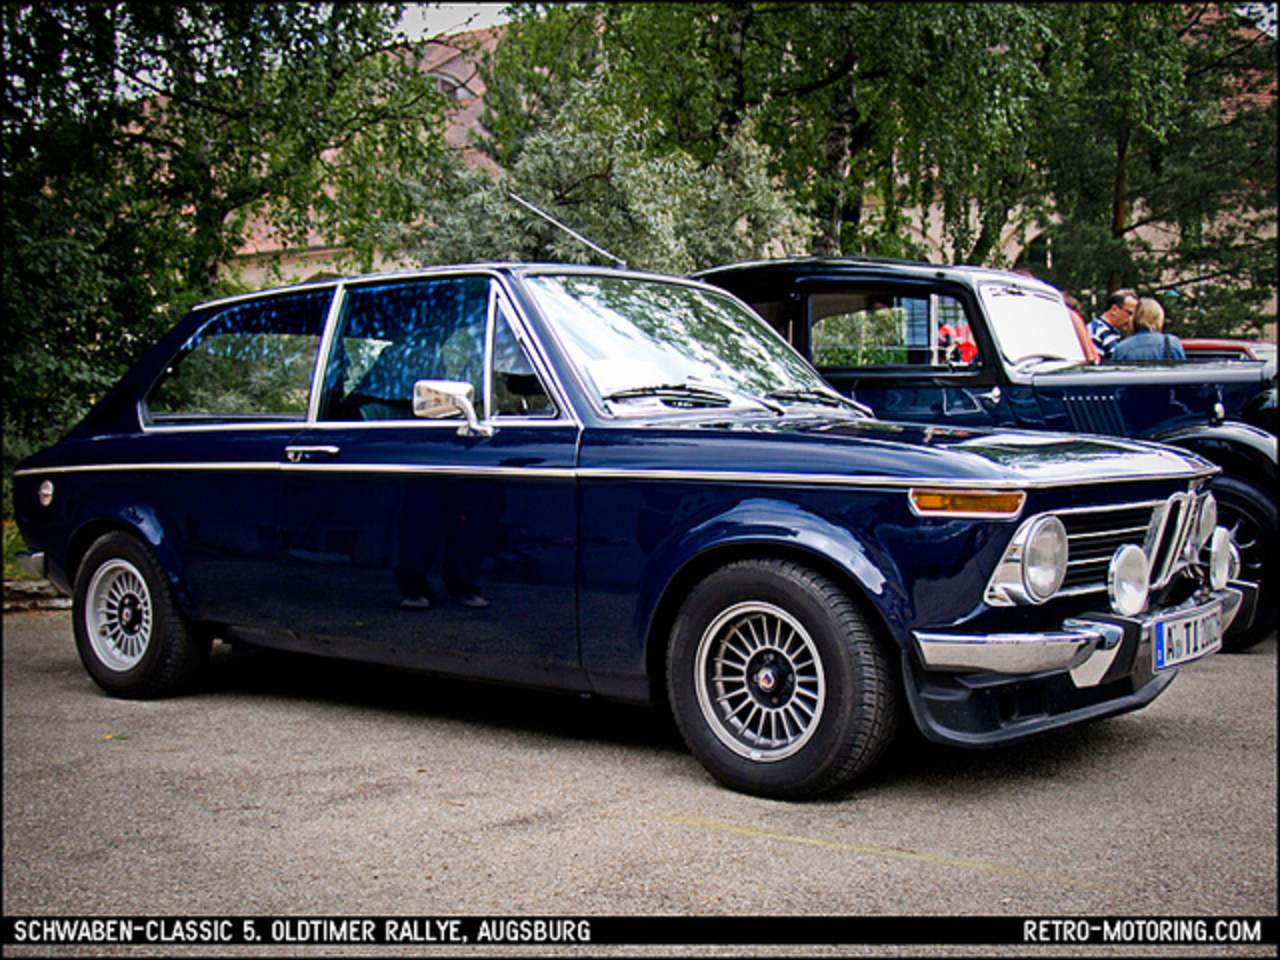 Blue BMW 2002 Touring | Flickr - Photo Sharing!